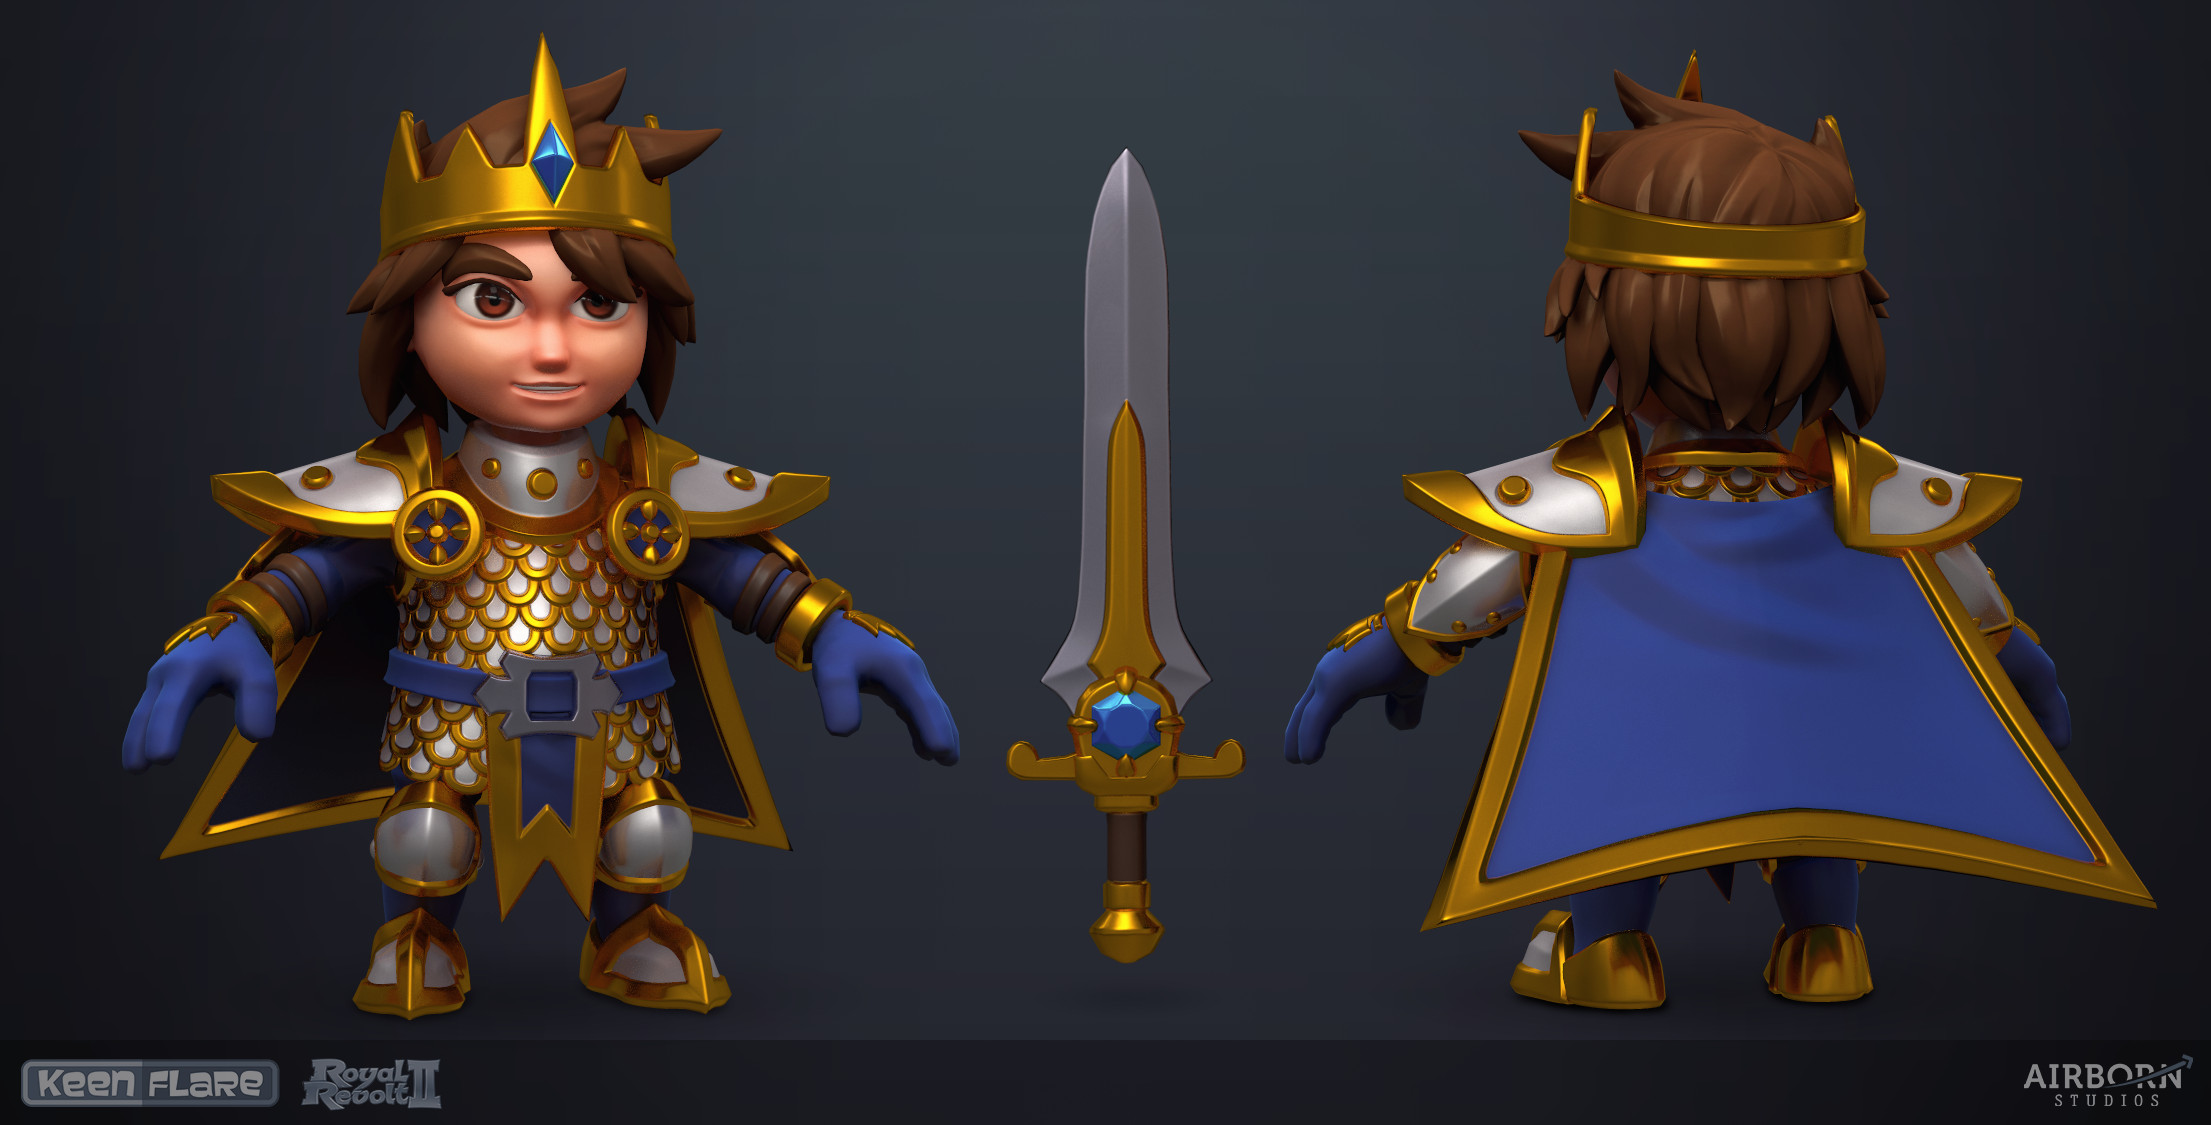 Royal Revolt 2: Hero final model by Tim Moreels


We had done the original main protagonist of the game years ago and now got tasked with updating and improving the model.